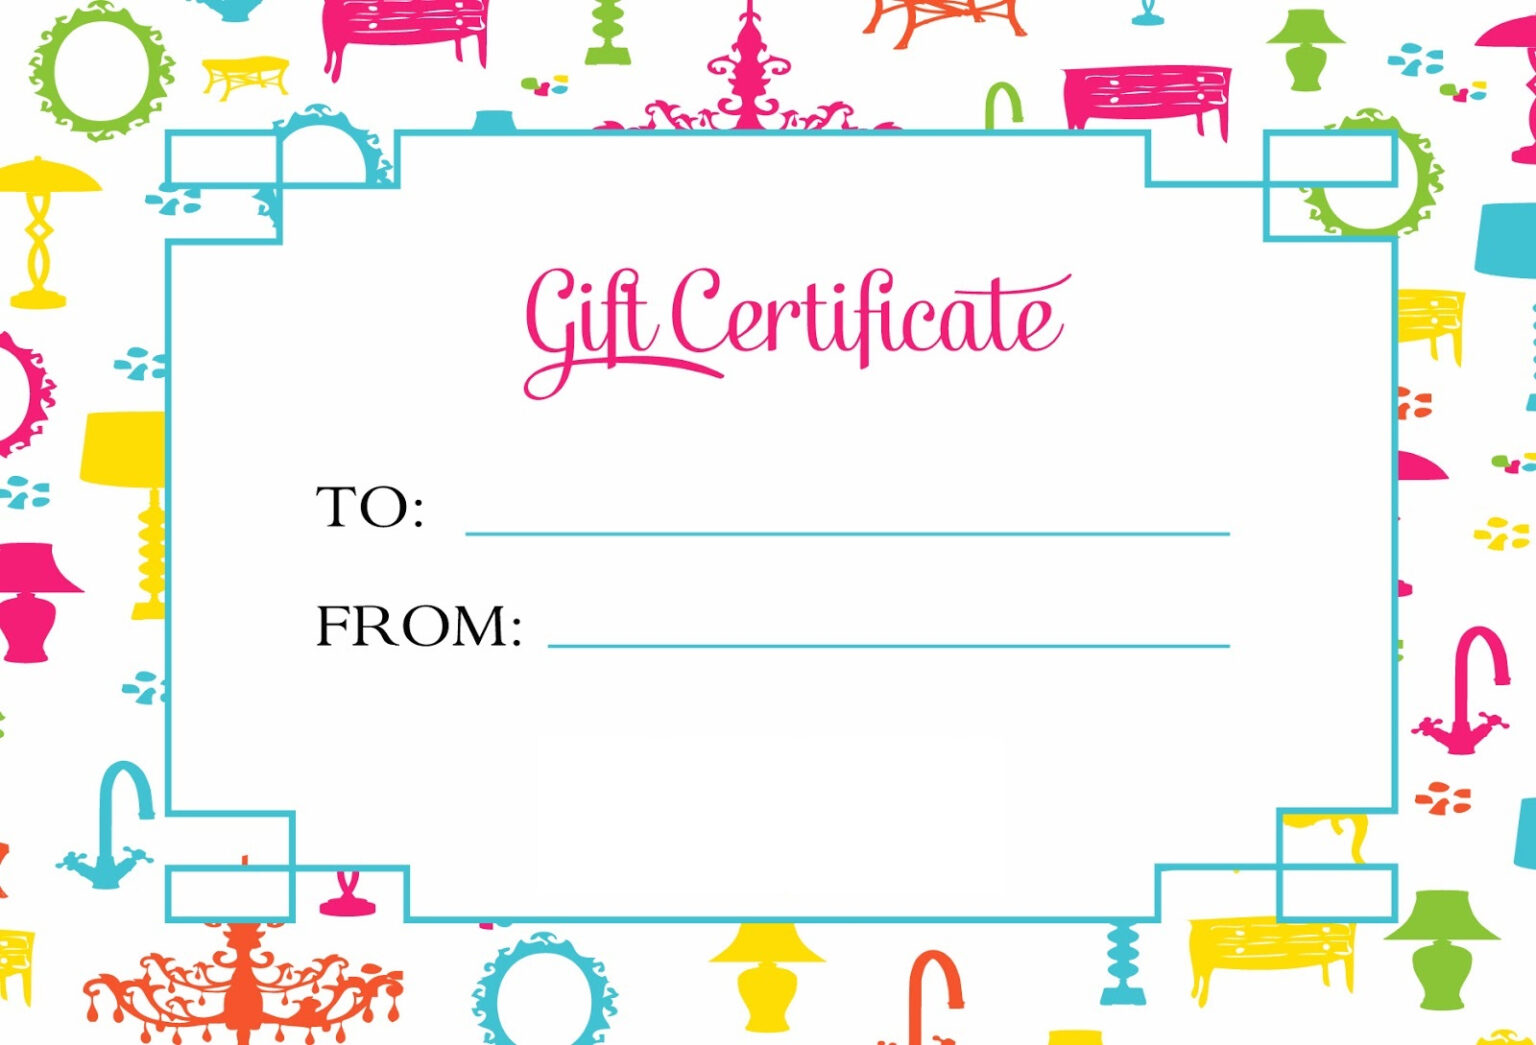 gift-certificate-template-for-kids-blanks-loving-printable-throughout-kids-gift-certificate